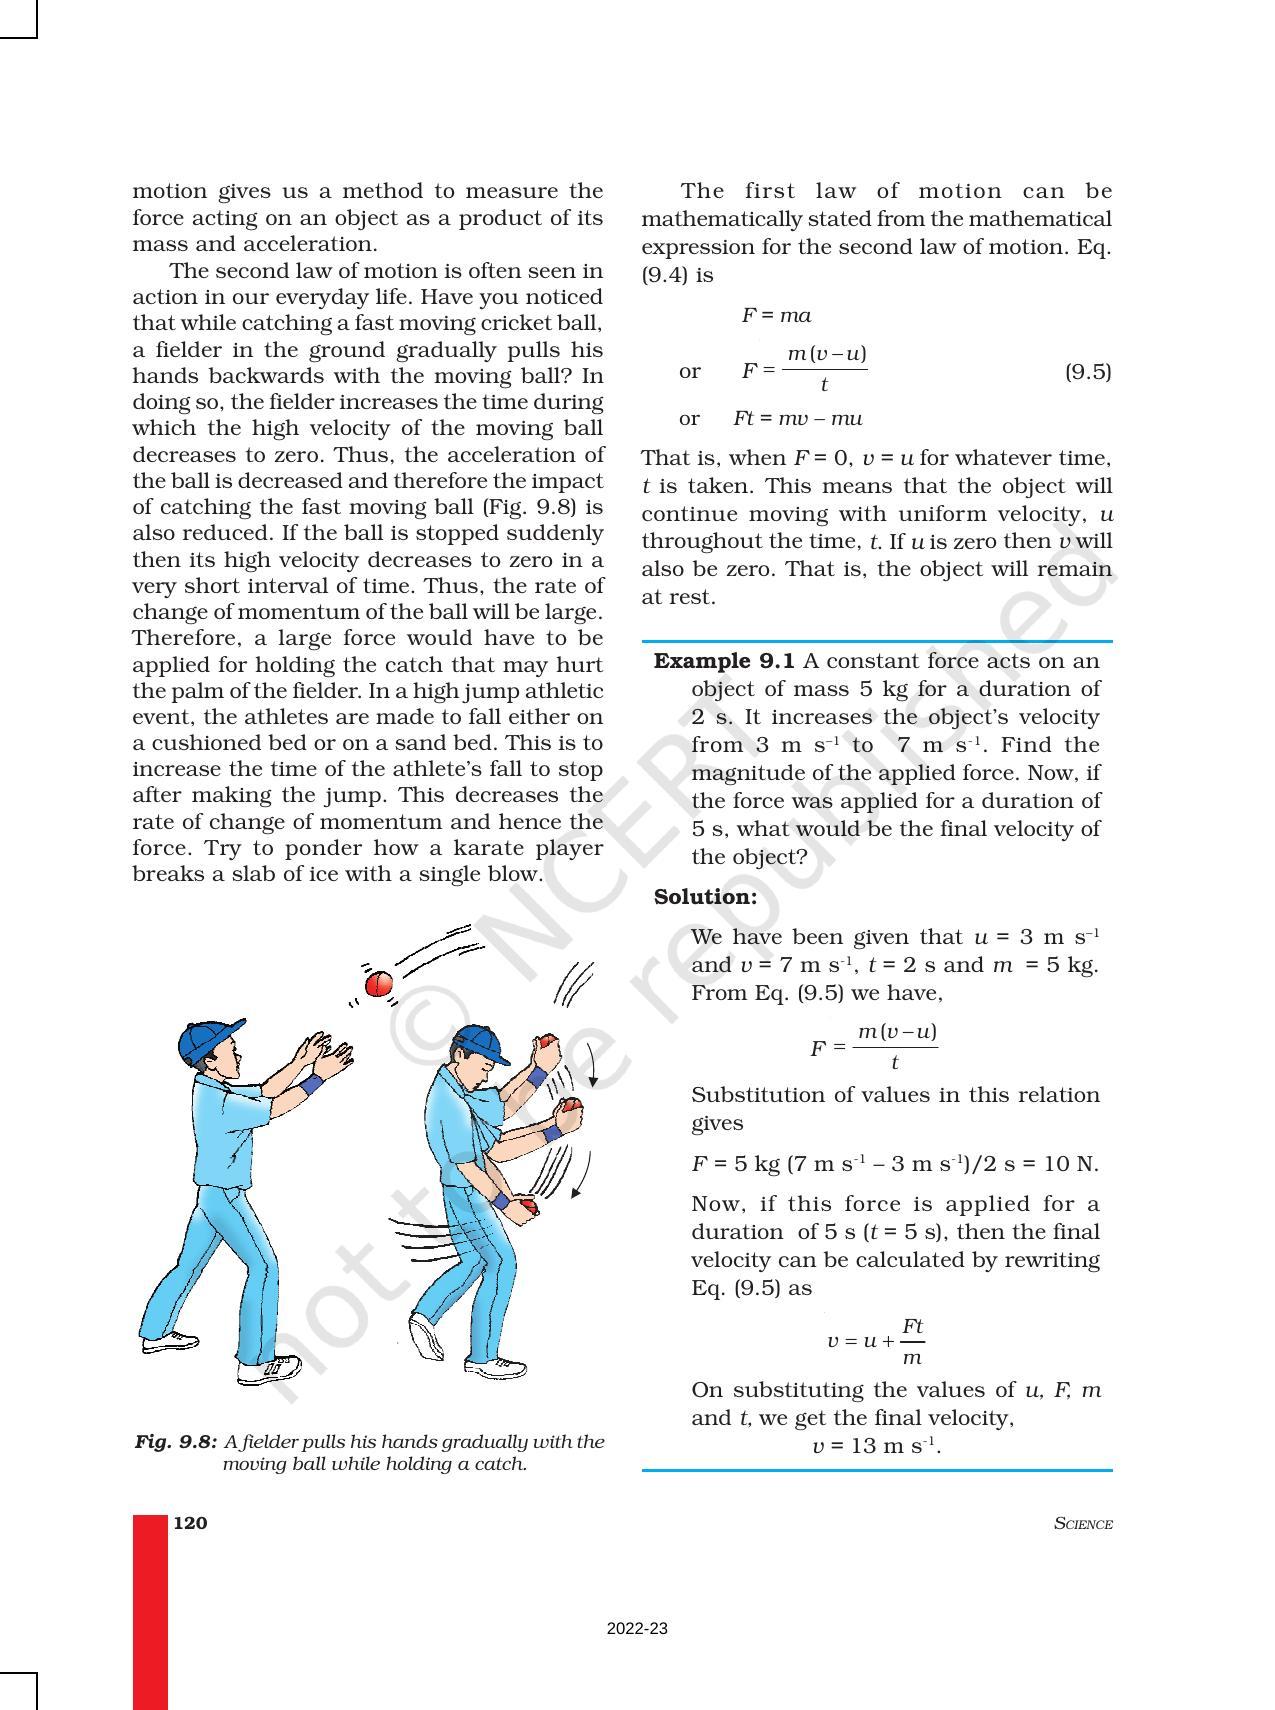 NCERT Book for Class 9 Science Chapter 9 Force And Laws Of Motion - Page 7